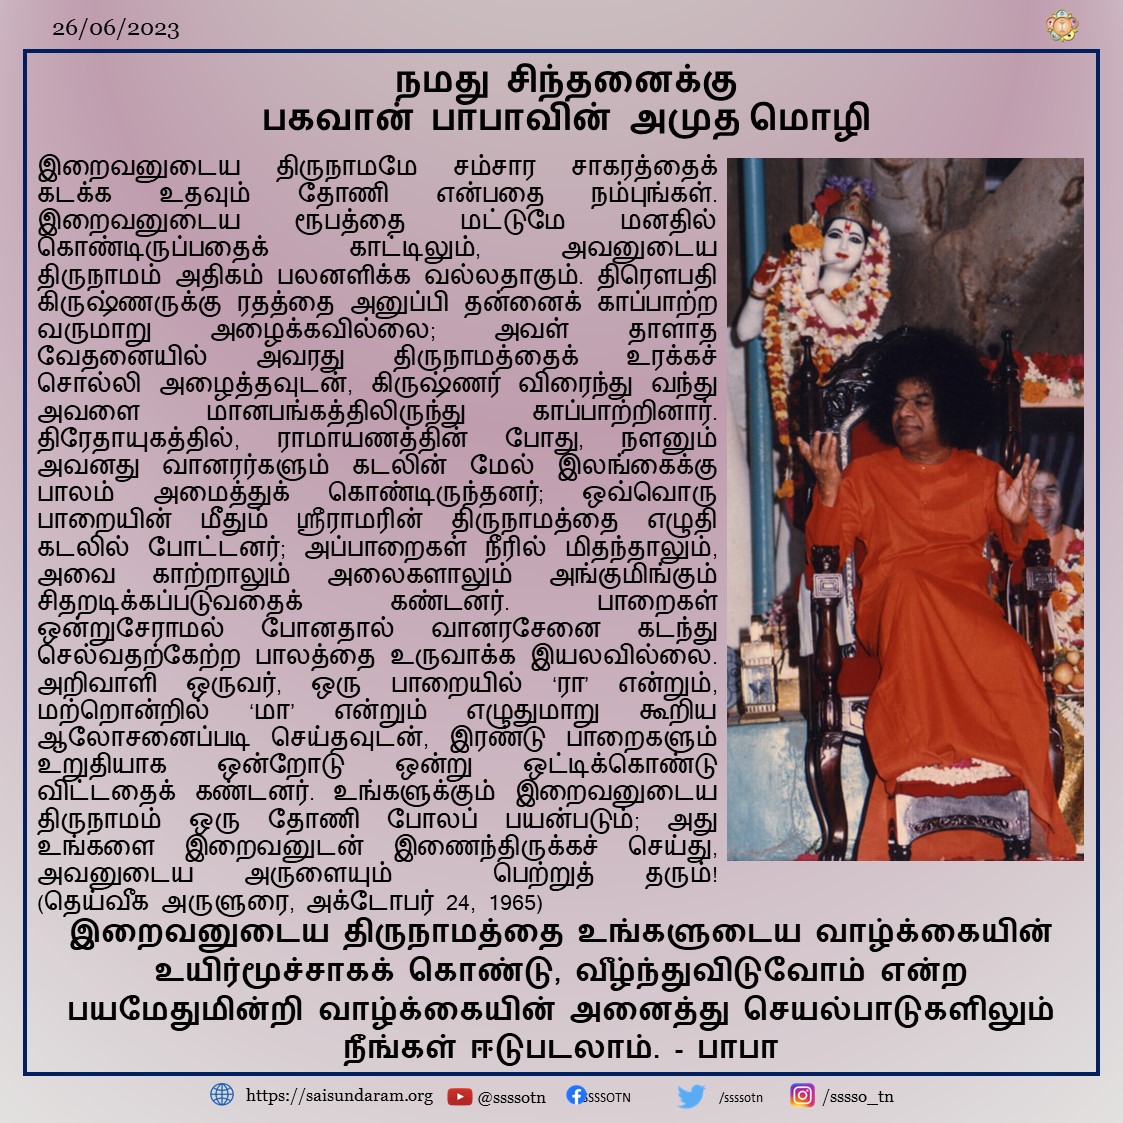 Thought For the Day | 26th June 2023  Our Most Beloved Bhagawan's Divine Message As Written in Prashanthi Nilayam, Puttaparthi. Divine Discourse - October 24, 1965  #SriSathyaSai #SriSathyaSaibaba #SriSathyaSai #ThoughtforTheDay #Divinemessage